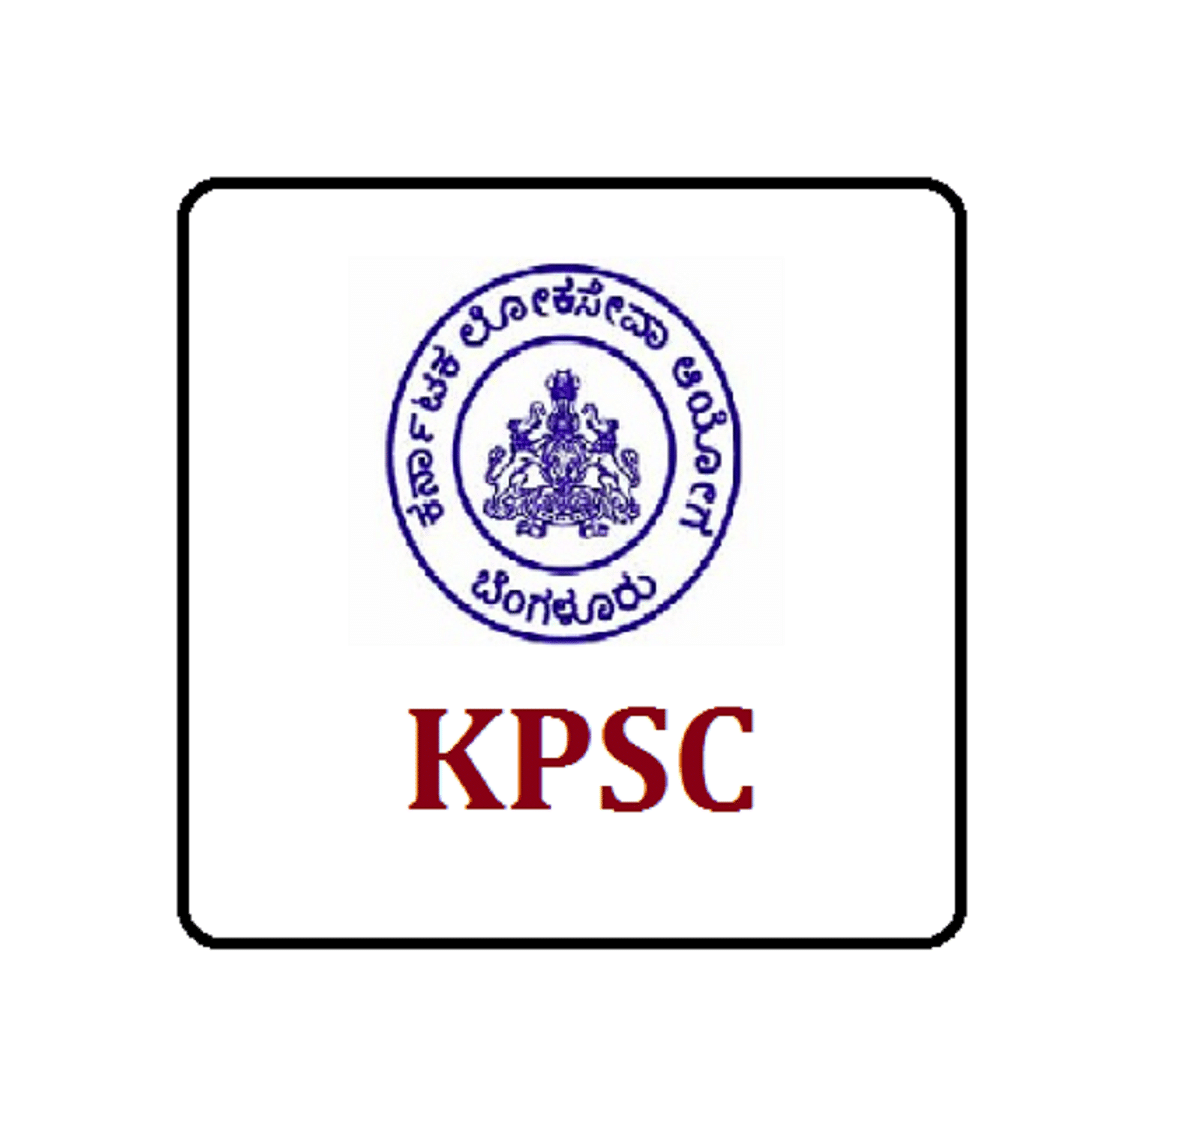 KPSC Exam 2020: Application Process for Assistant / Second Division Assistant Posts Extended, Check Latest Update